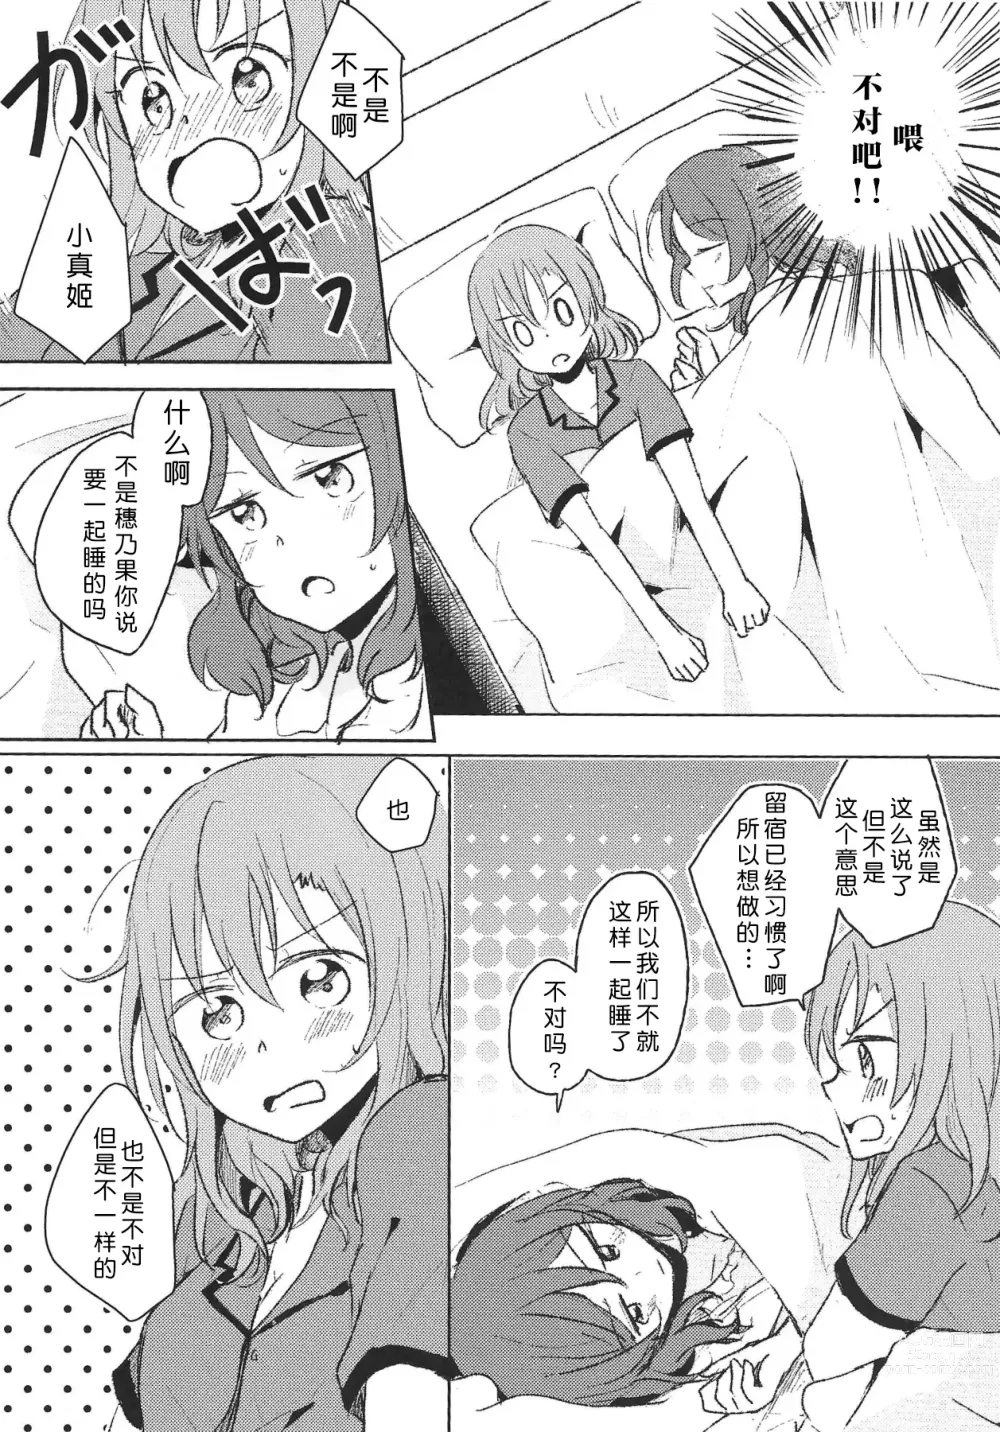 Page 6 of doujinshi LOVE STEP!